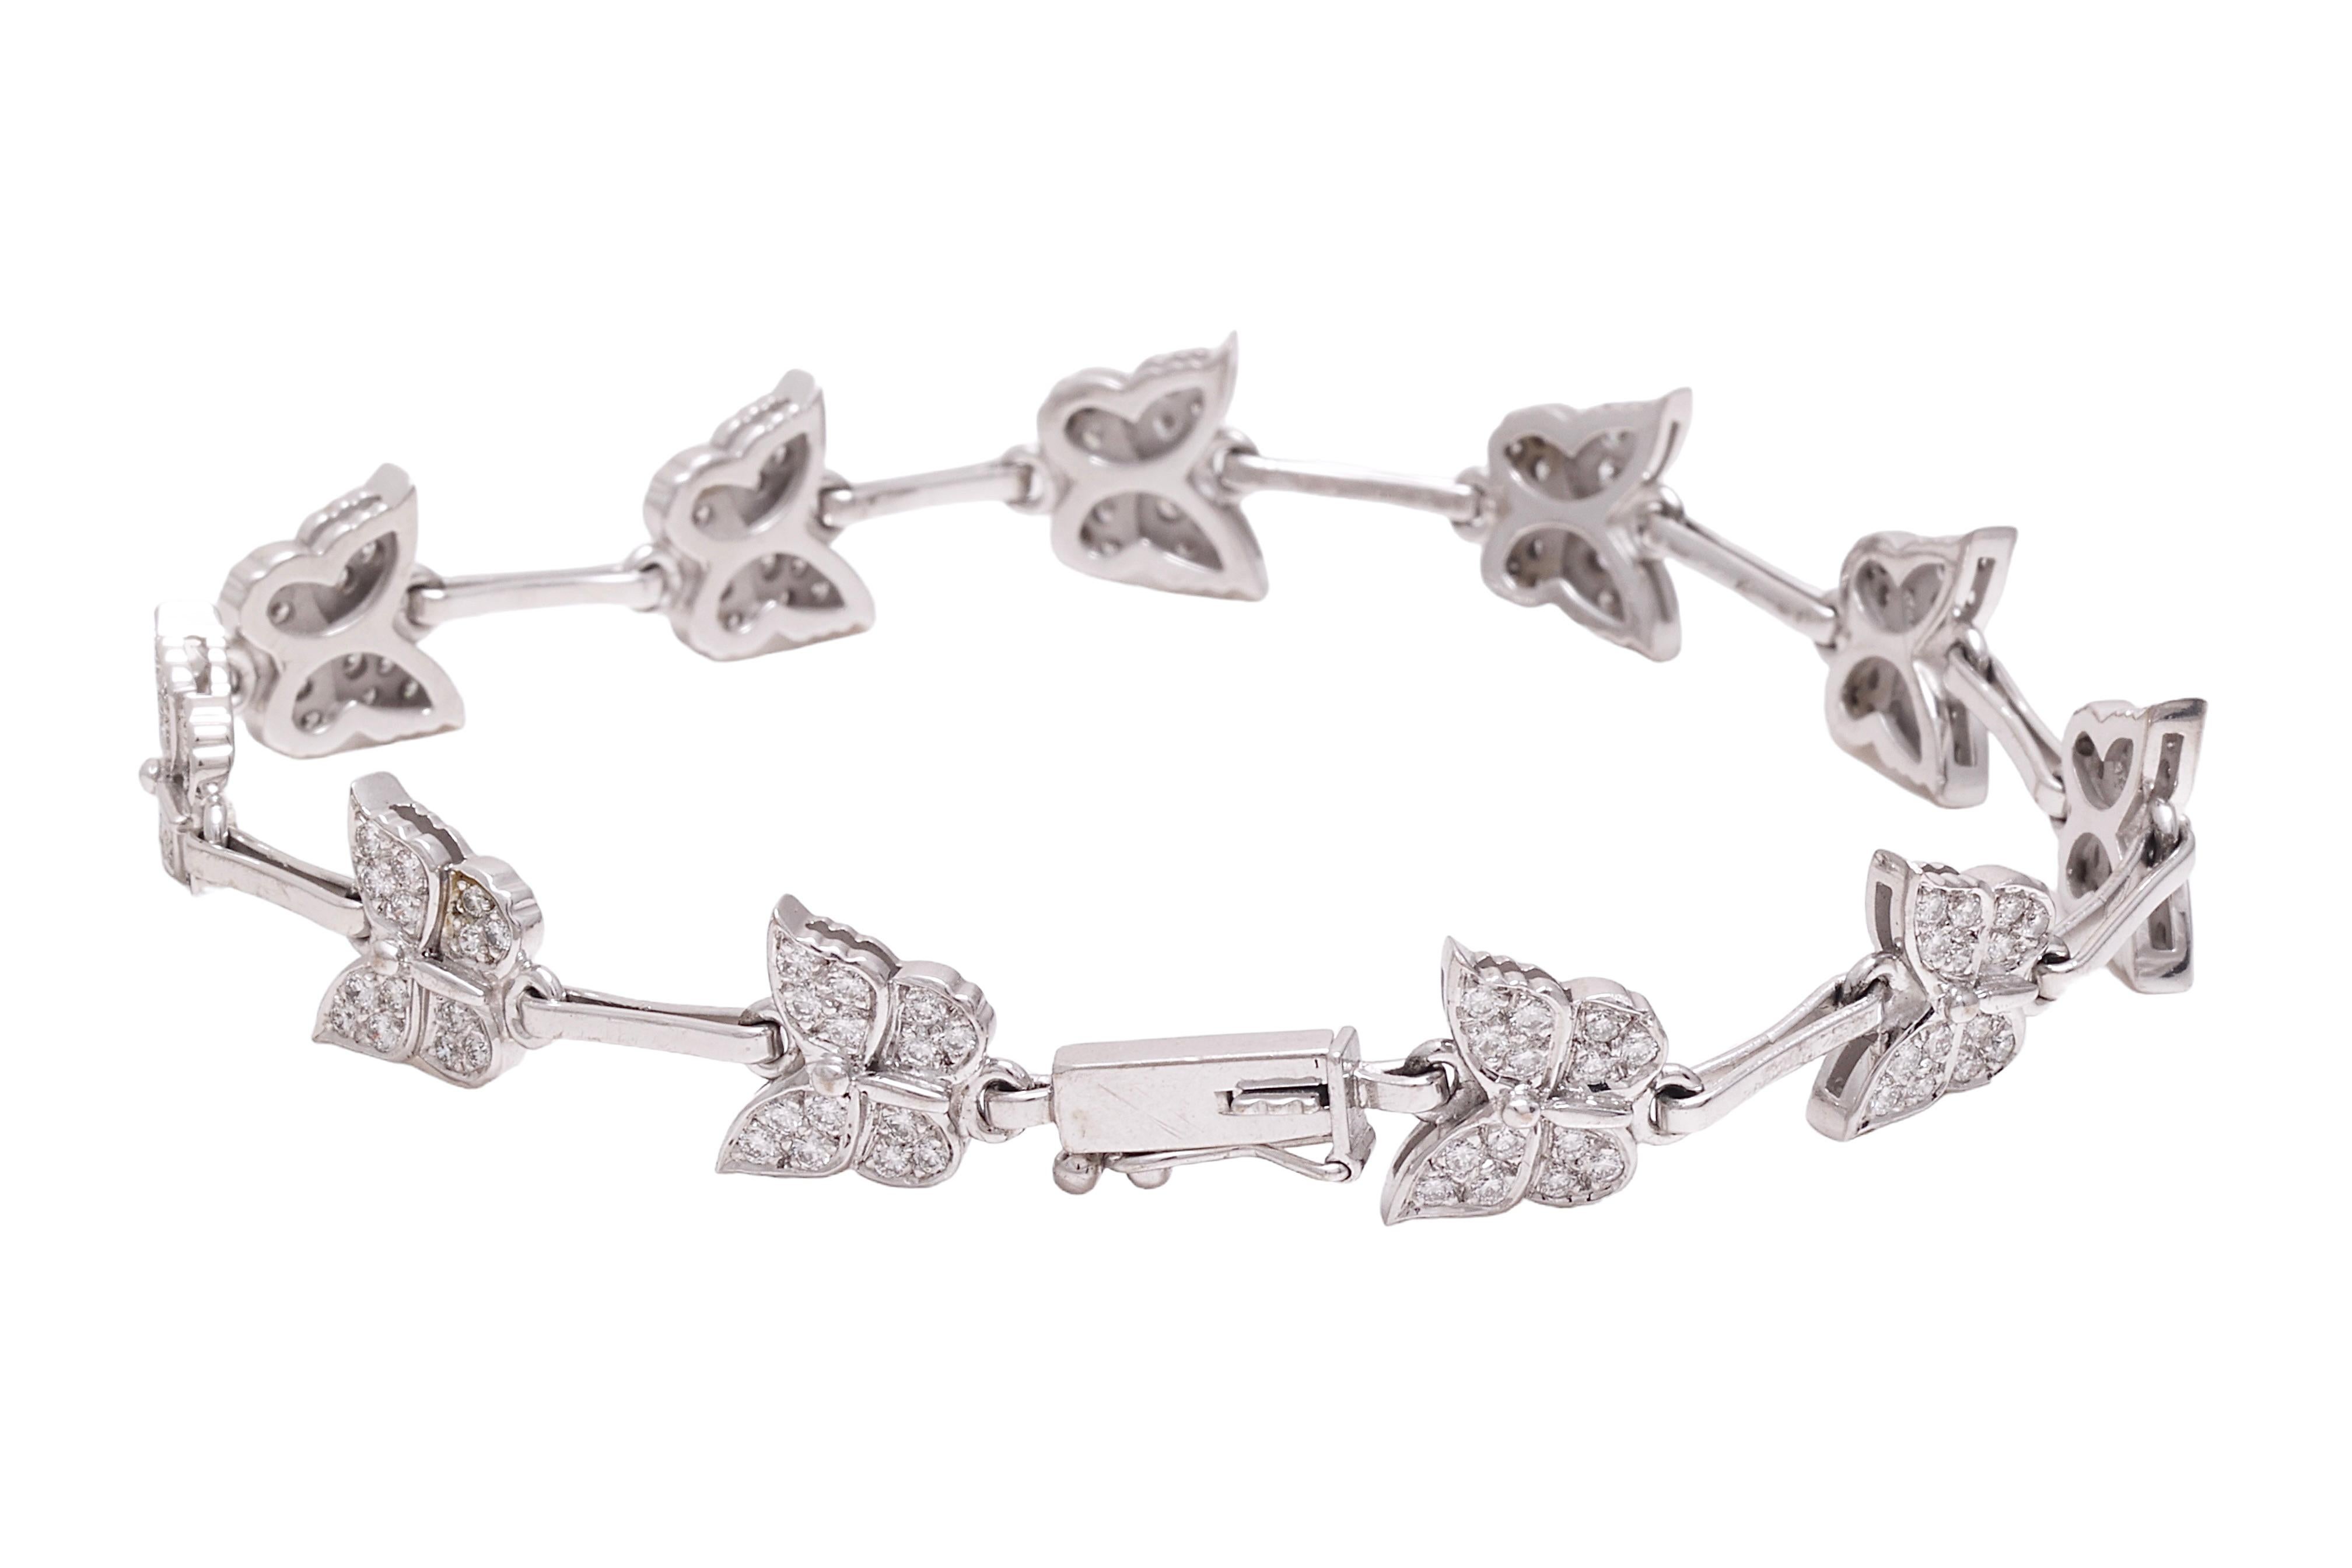  18 kt. White Gold Butterfly Bracelet Set with 1.32 ct. Diamonds For Sale 2